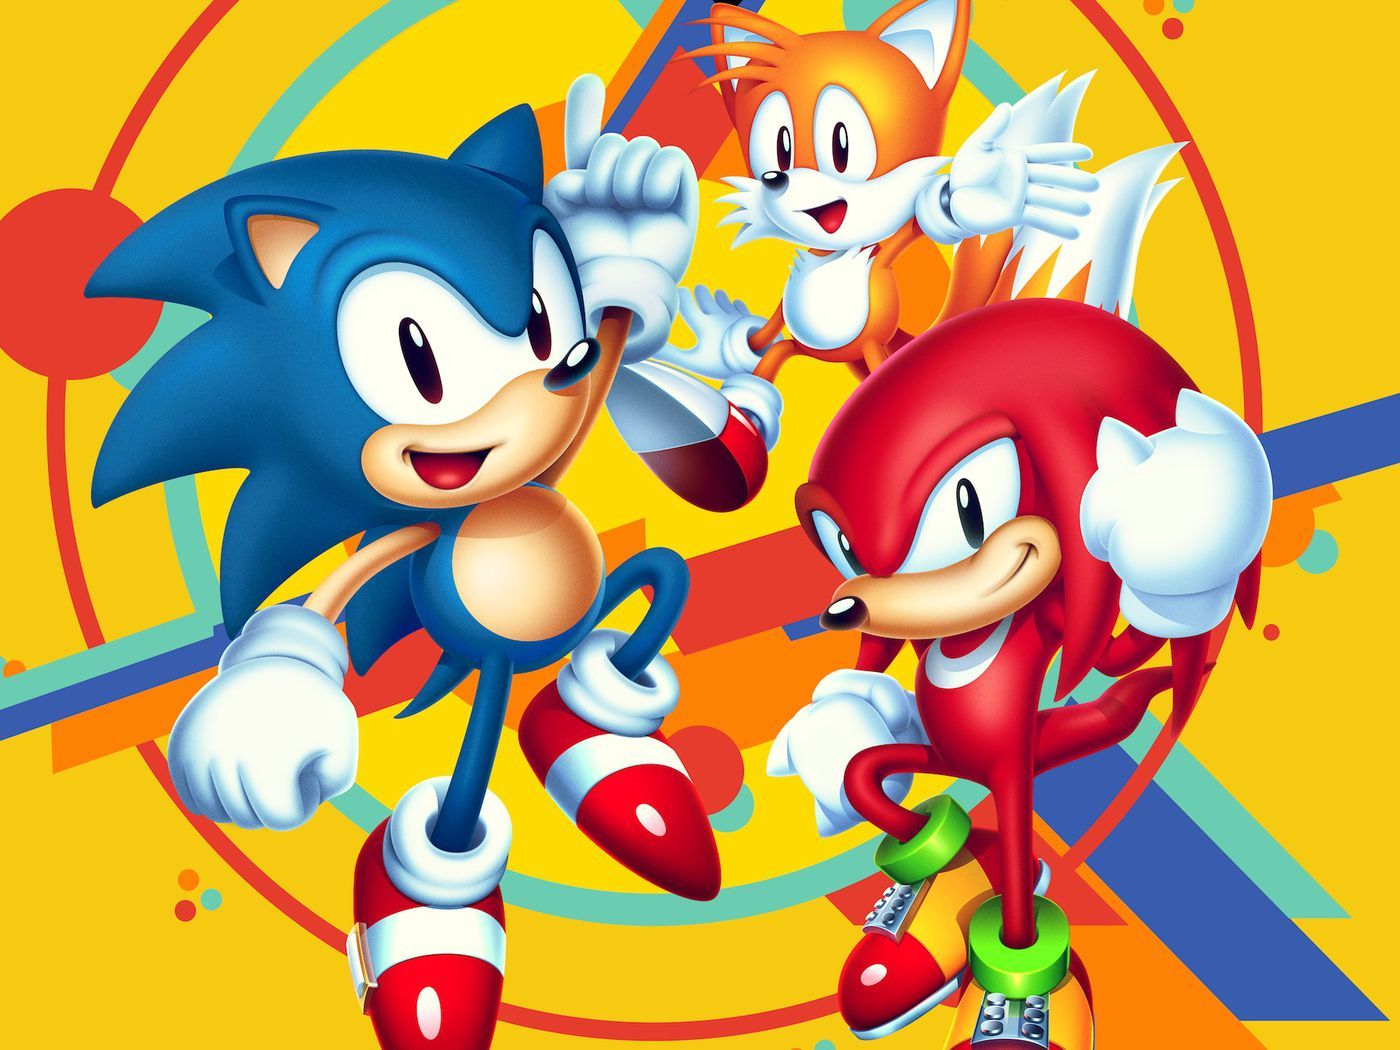 The best 12 Sonic the Hedgehog games, ranked